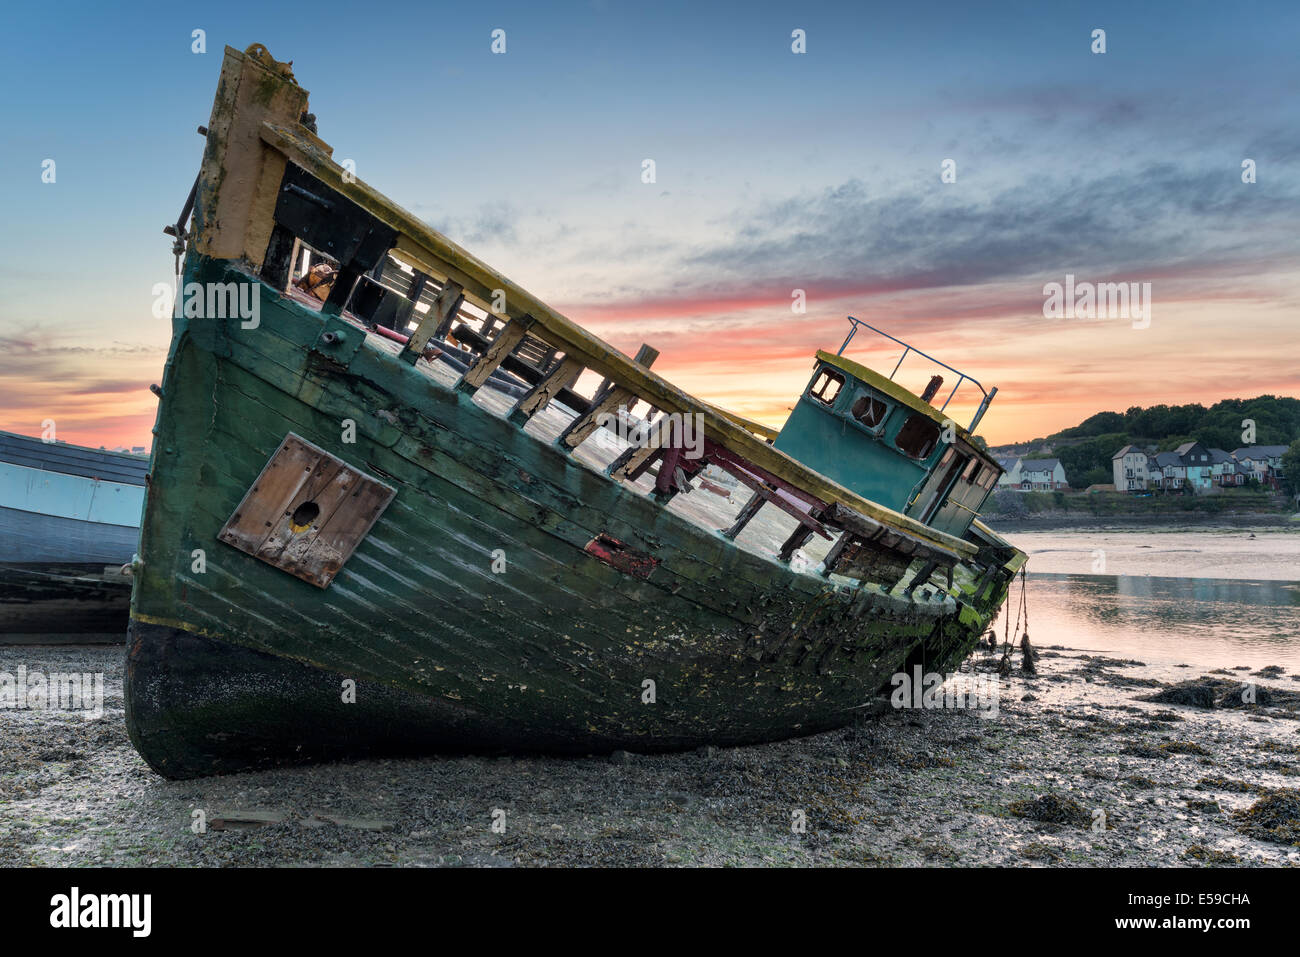 An old wrecked wooden boat on the shore Stock Photo